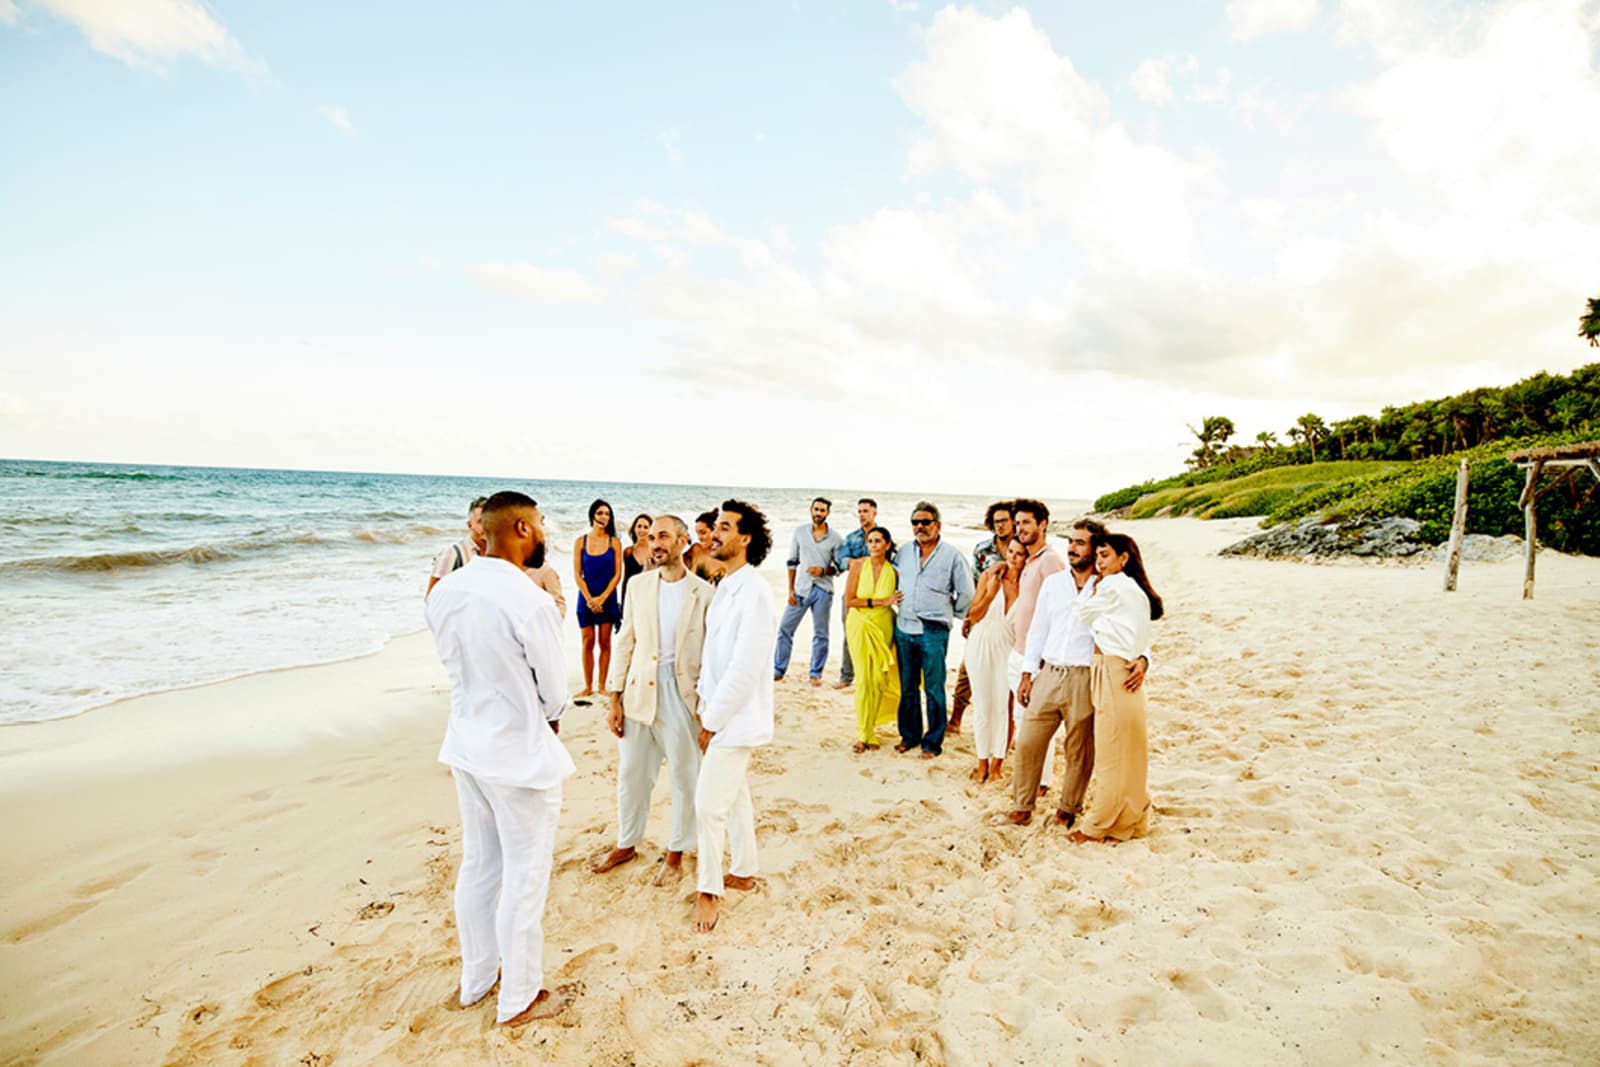 A small group of guests attend a destination wedding on a beach